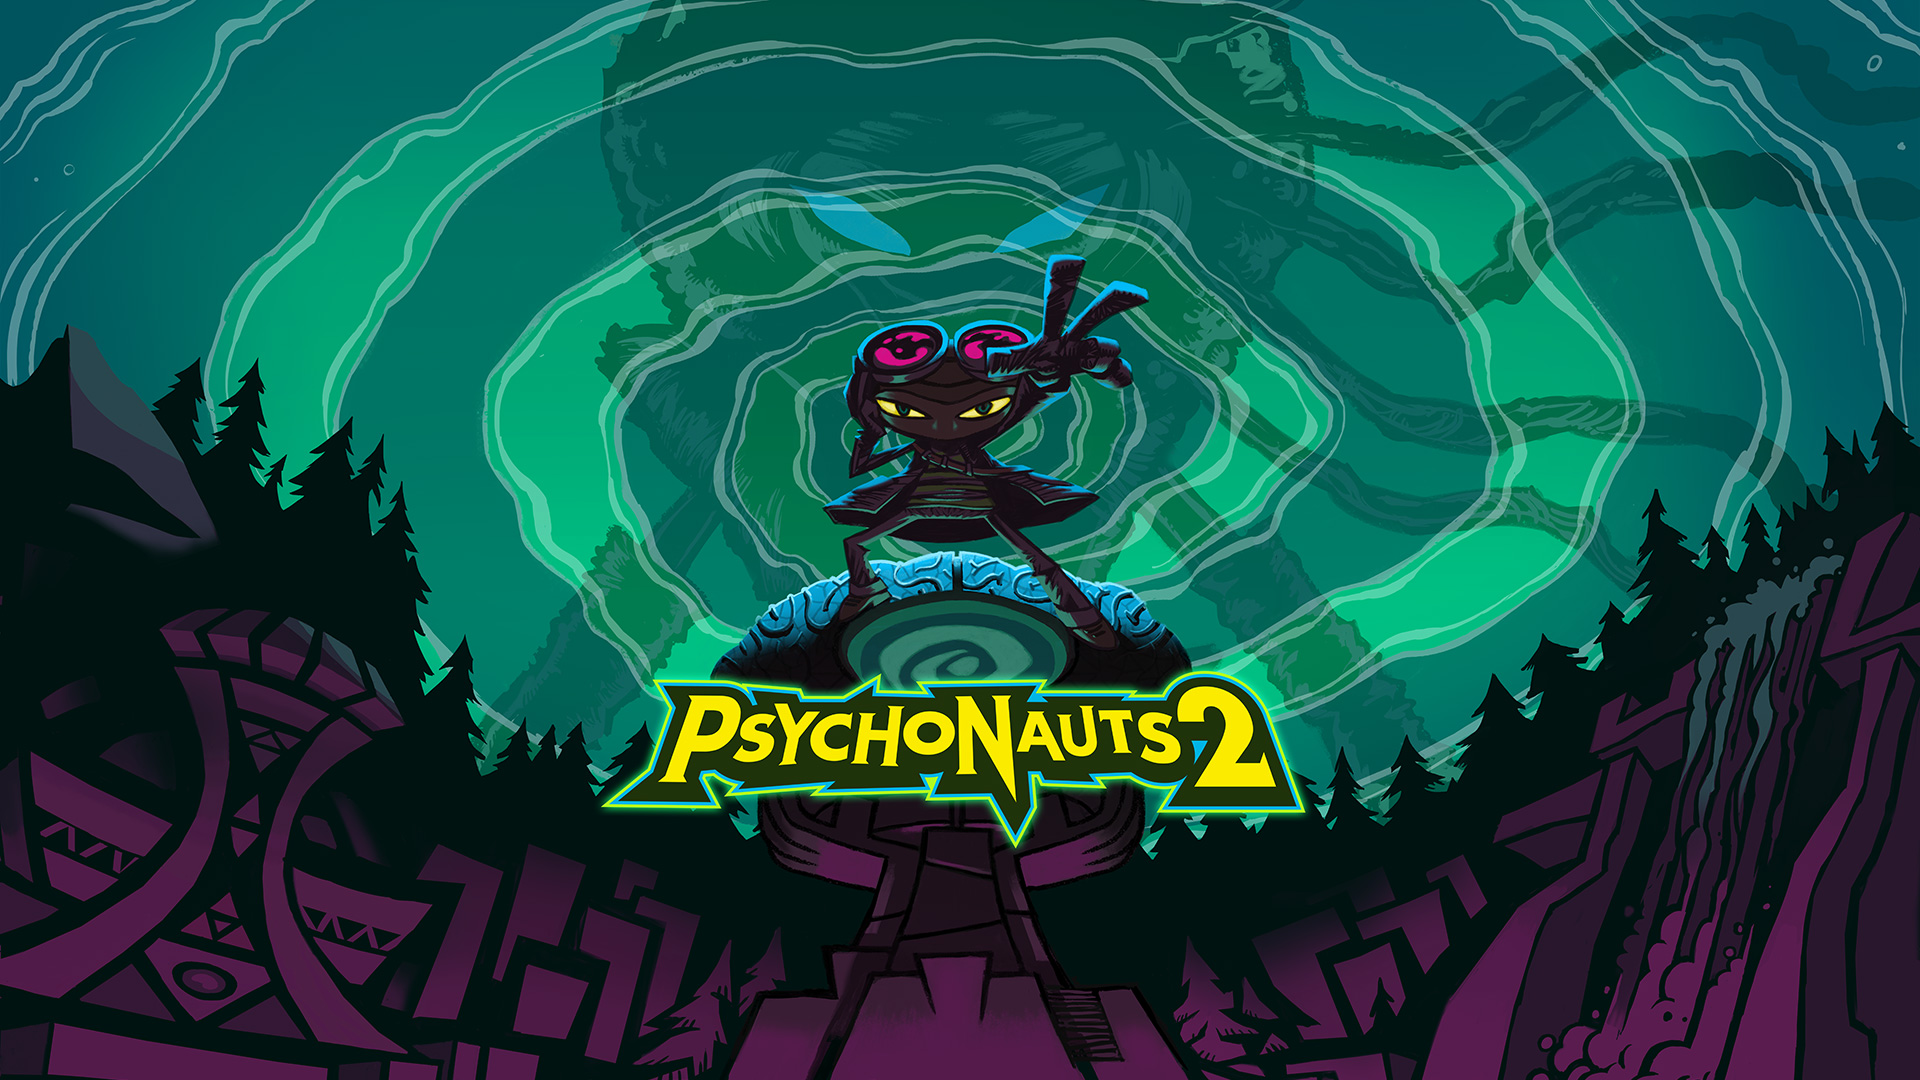 Video For Psychonauts 2 Is Now Available For Windows 10, Xbox One, And Xbox Series X|S (Xbox Game Pass)